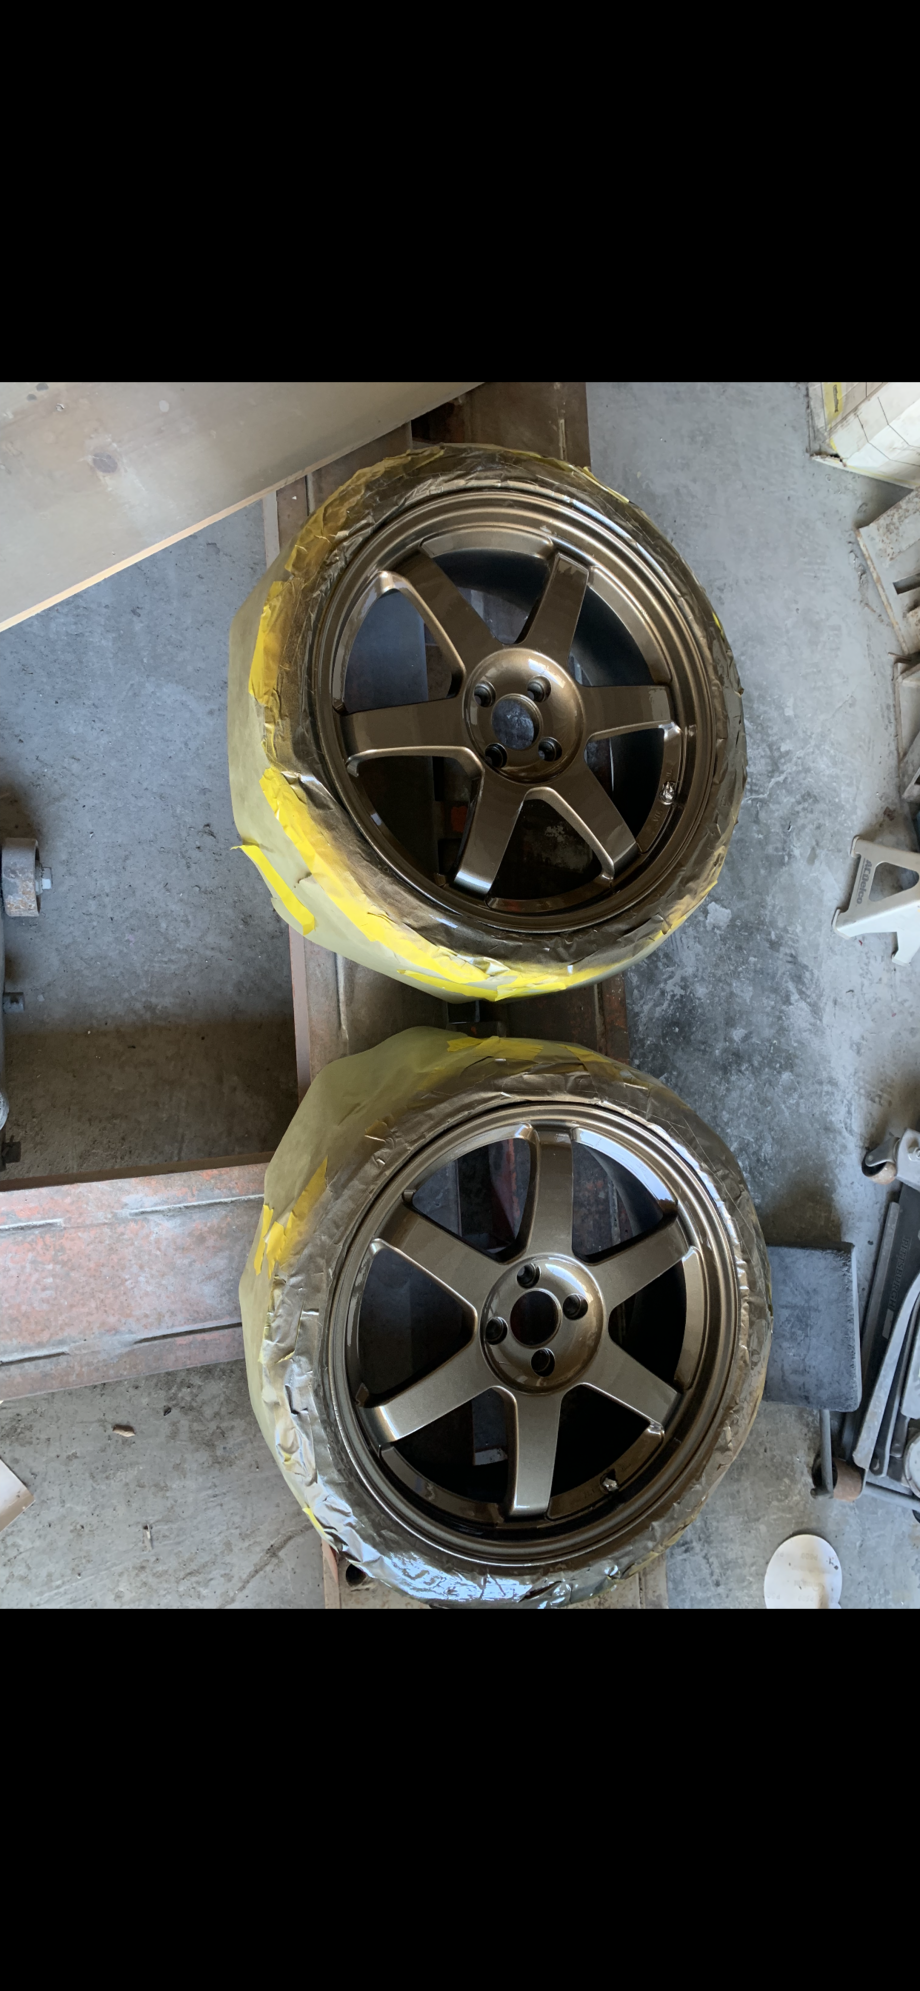 Wheels and Tires/Axles - Volk te37 18x7.5 4x100 215/40:18 Michellen  RARE - Used - 0  All Models - South San Francisco, CA 94080, United States